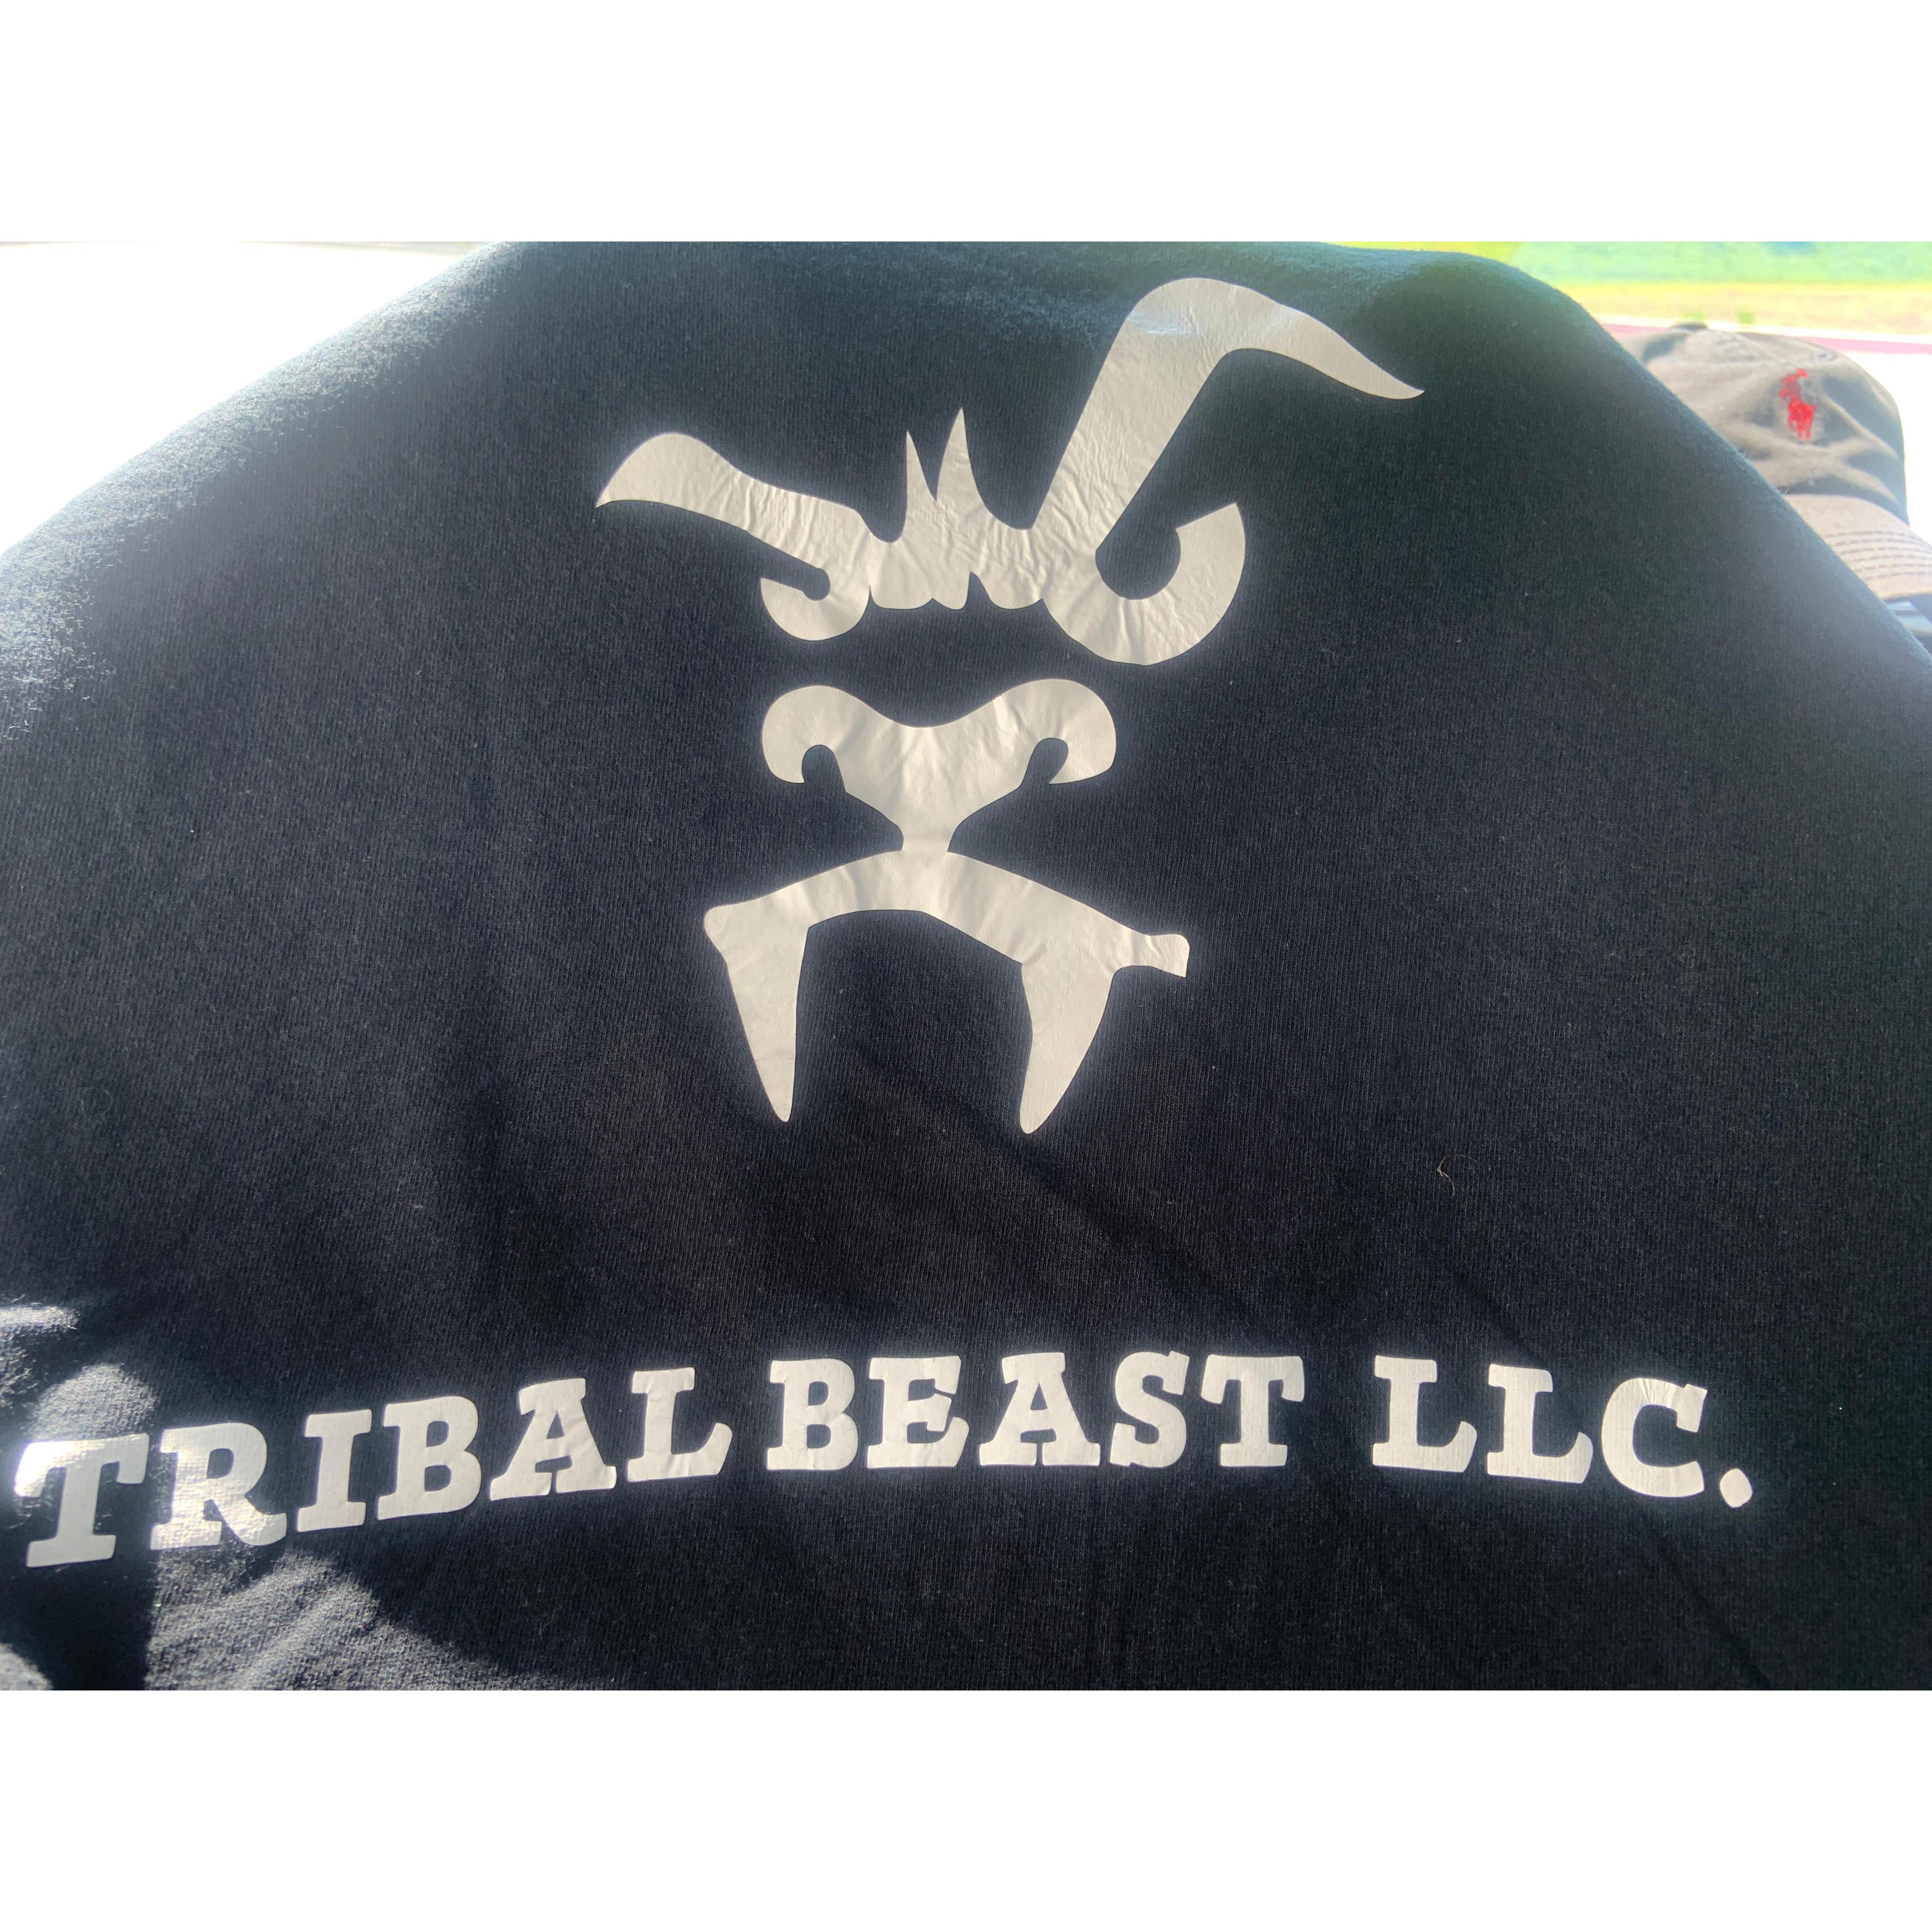 Tribalbeast package delivery services Logo